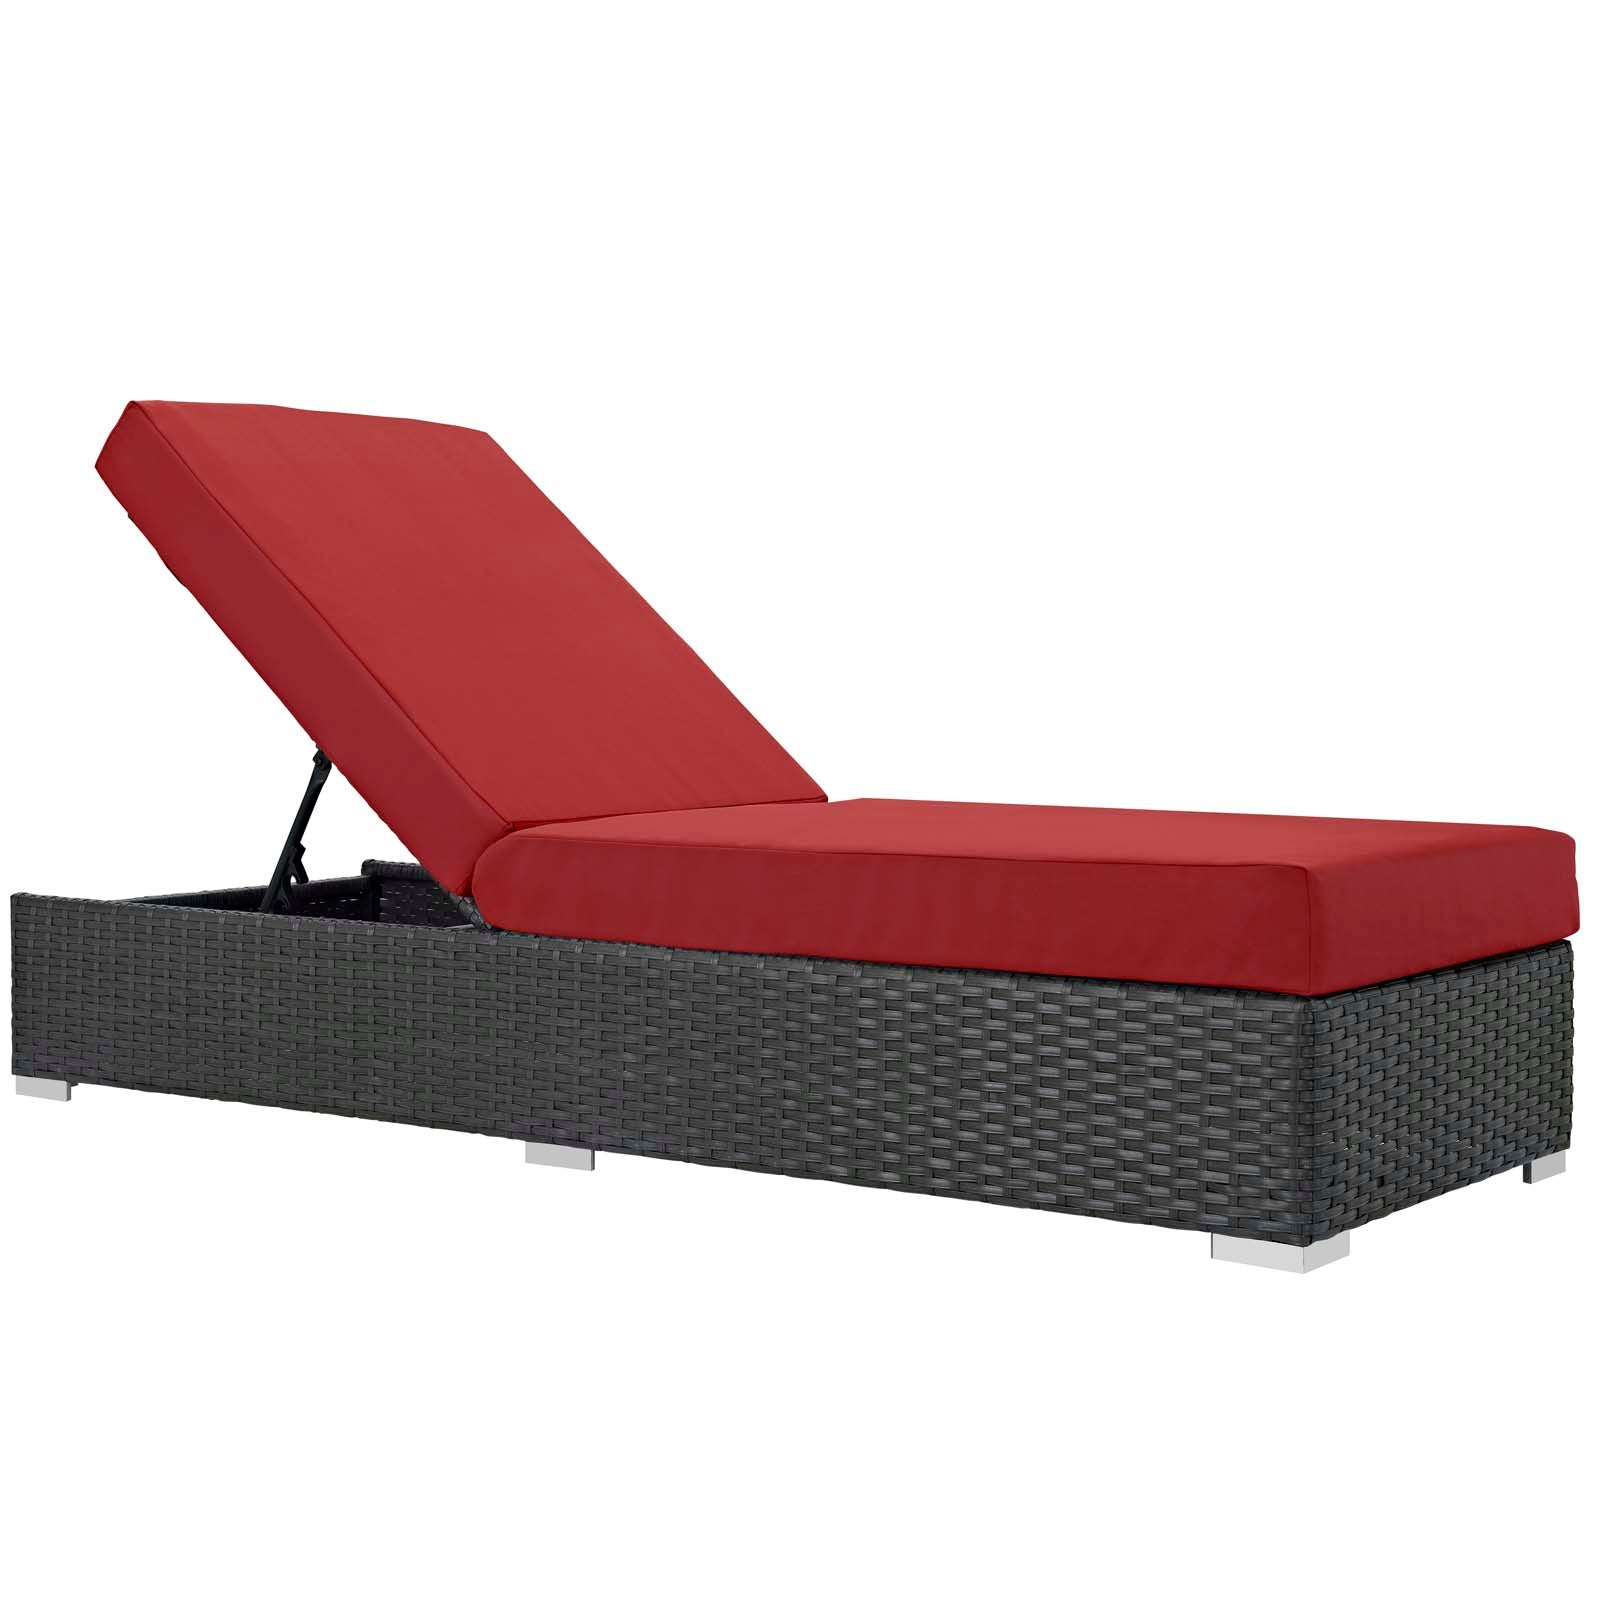 Modway Outdoor Loungers - Sojourn Outdoor Patio Sunbrella Chaise Lounge Canvas Red